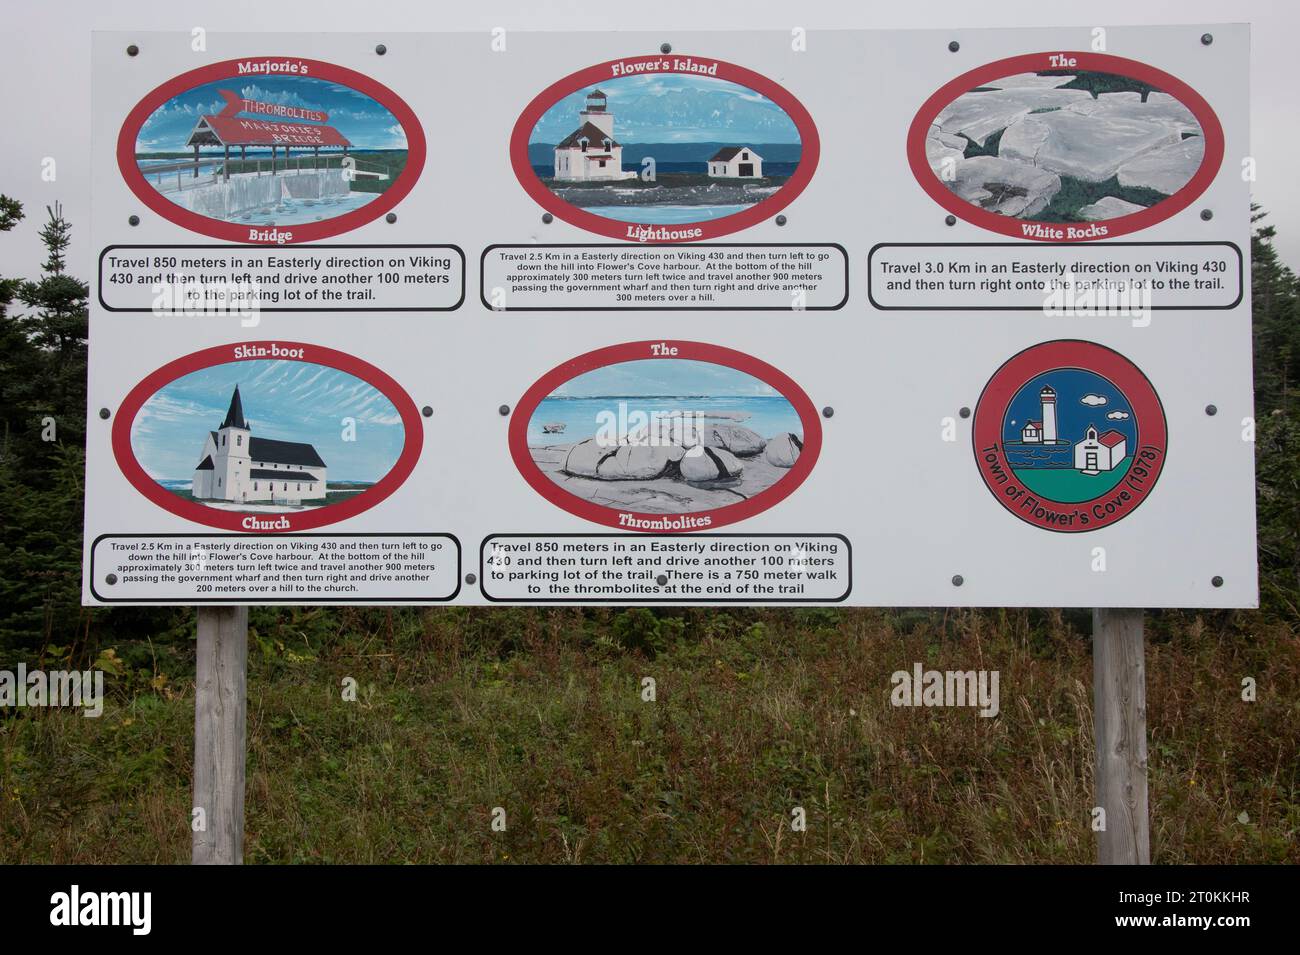 List of attractions sign in Flower's Cove, Newfoundland & Labrador, Canada Stock Photo